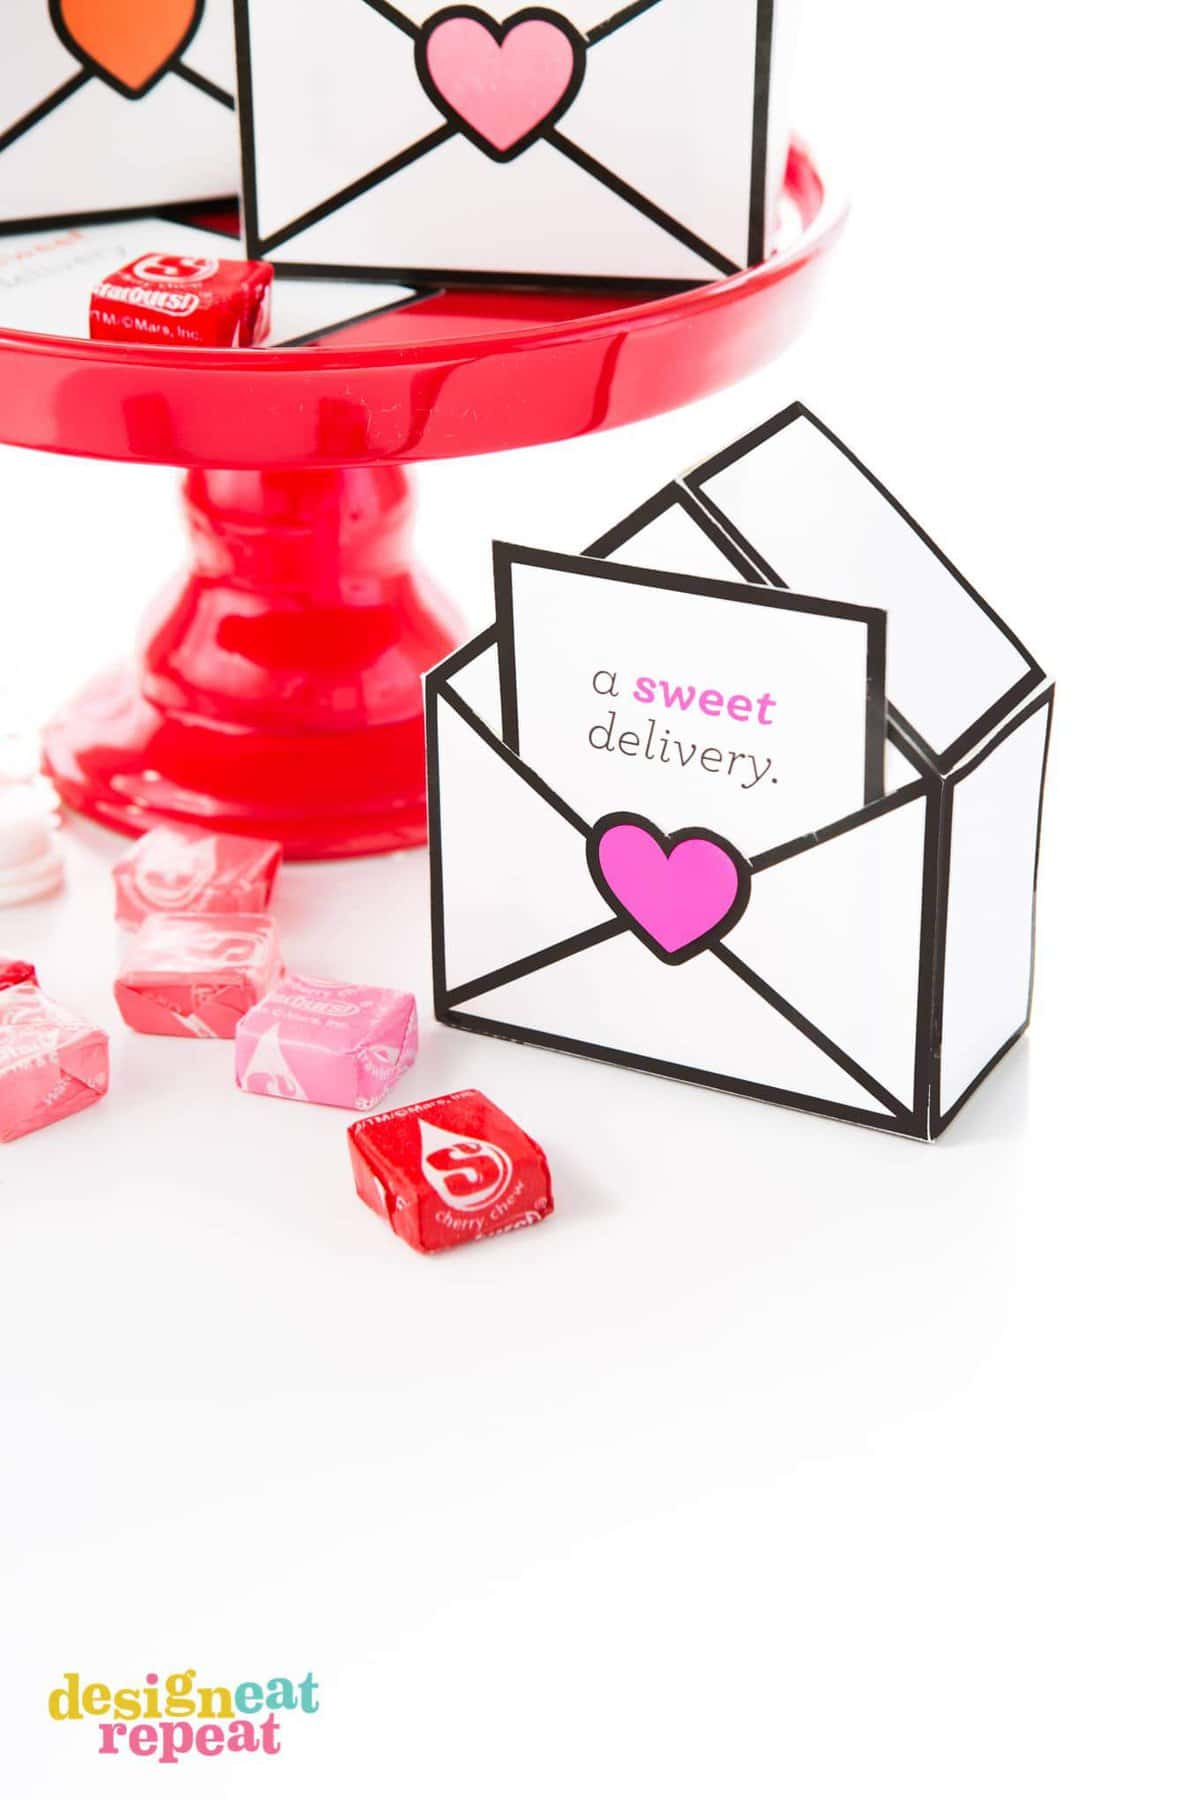 Printable Valentines gift boxes that are designed like envelopes with a sweet delivery notecard filled with Starburst.